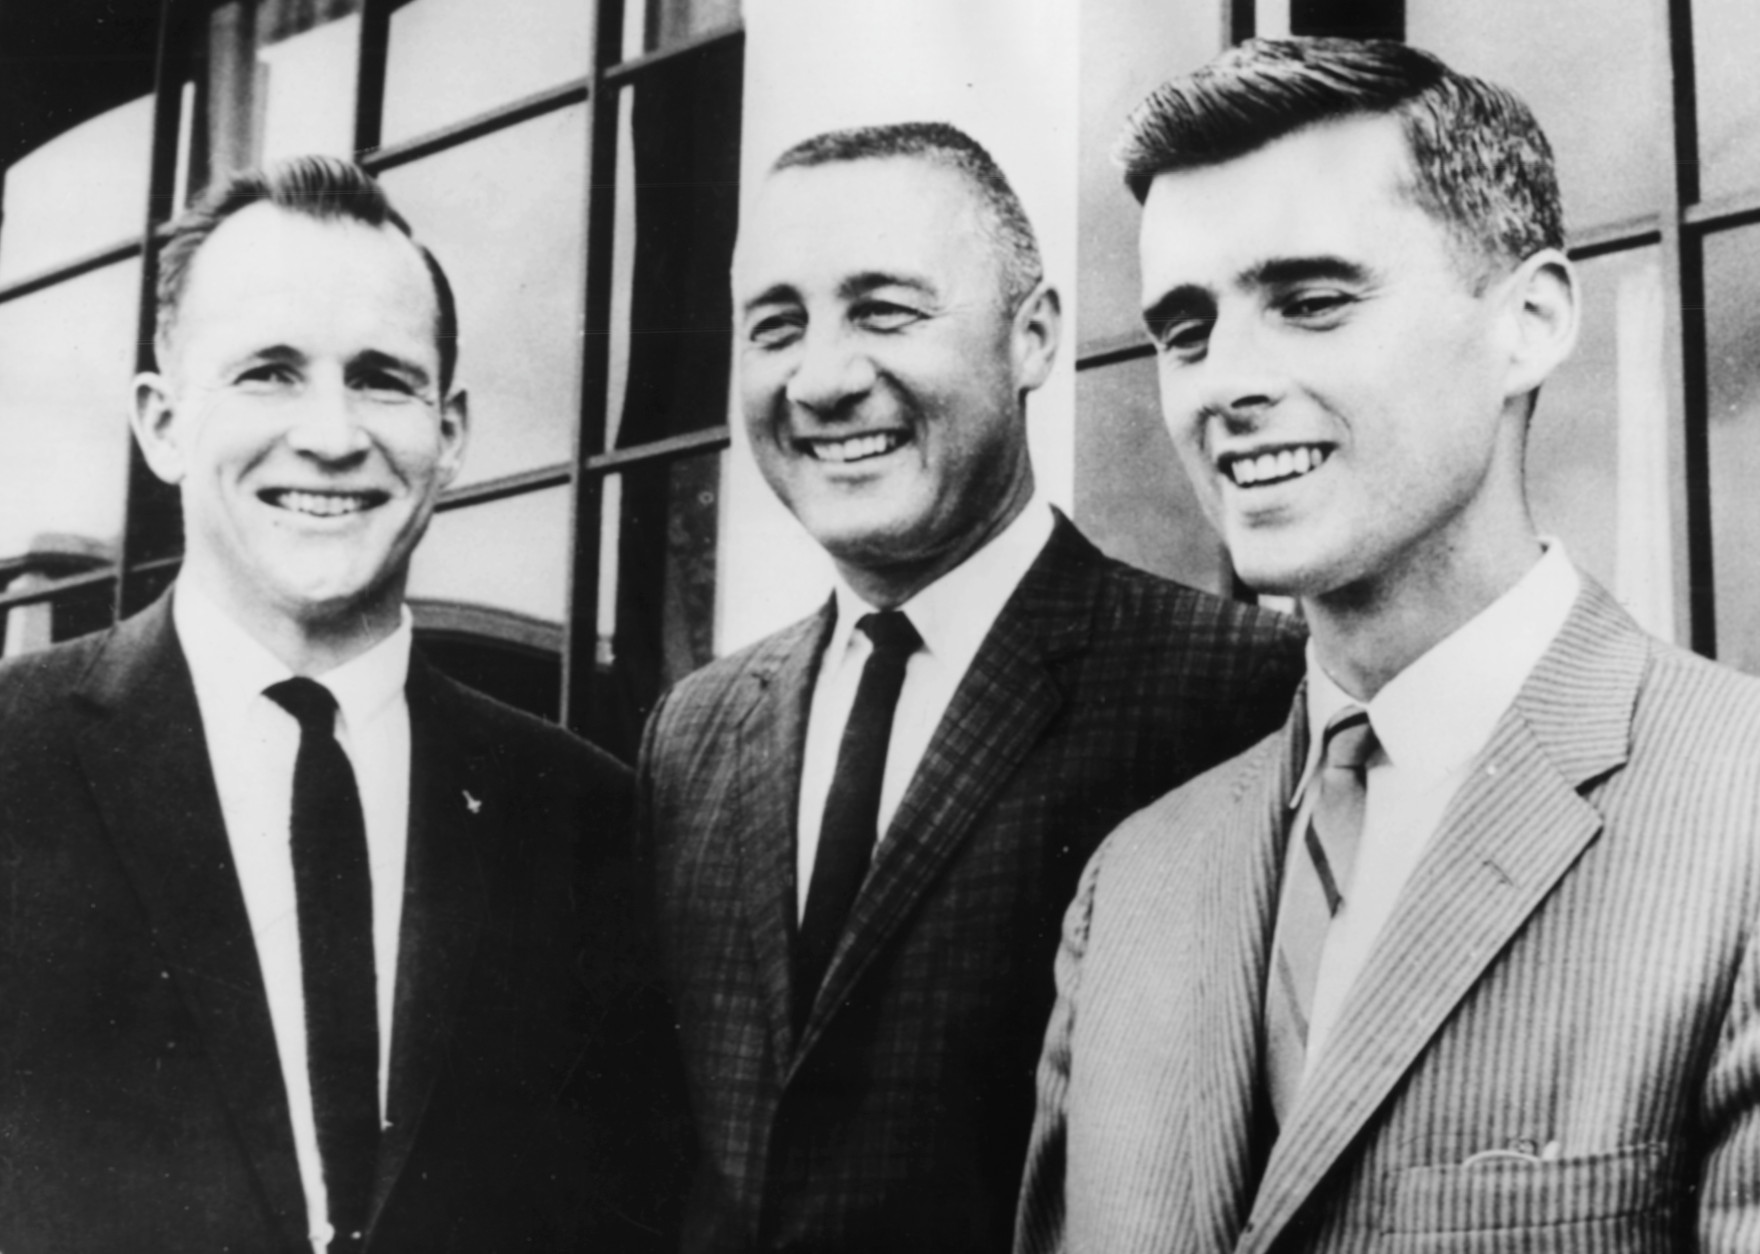 Portrait of Apollo 1 astronauts (L-R) Edward H White, Virgil I Grissom And Roger Chaffee, 1967. Printed following their death in a fire during training, January 27th 1967. (Photo by Keystone/Hulton Archive/Getty Images)